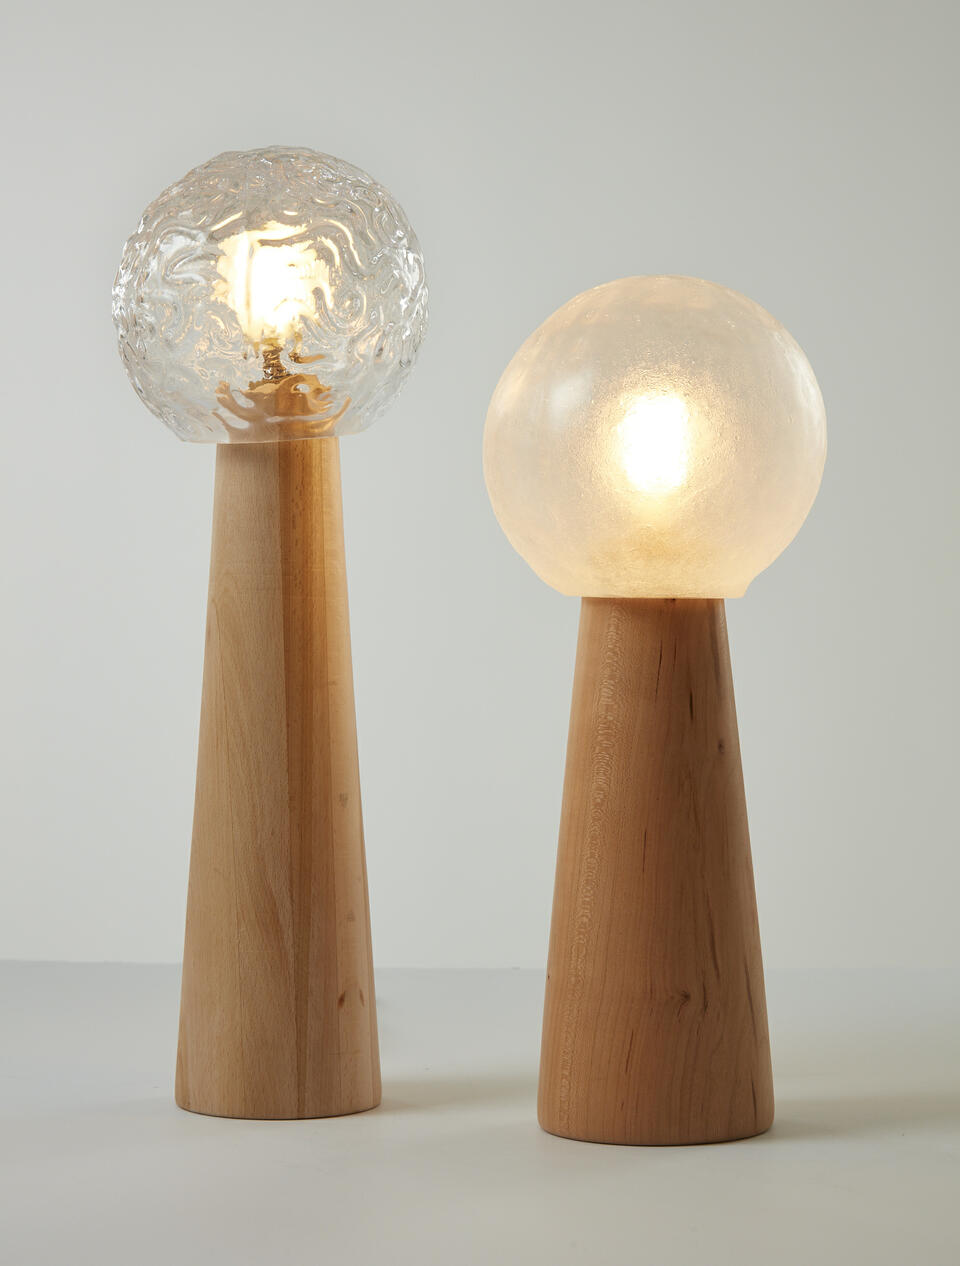 Table Lamps made of glassblown glass, beech, cherry and lightbulb.